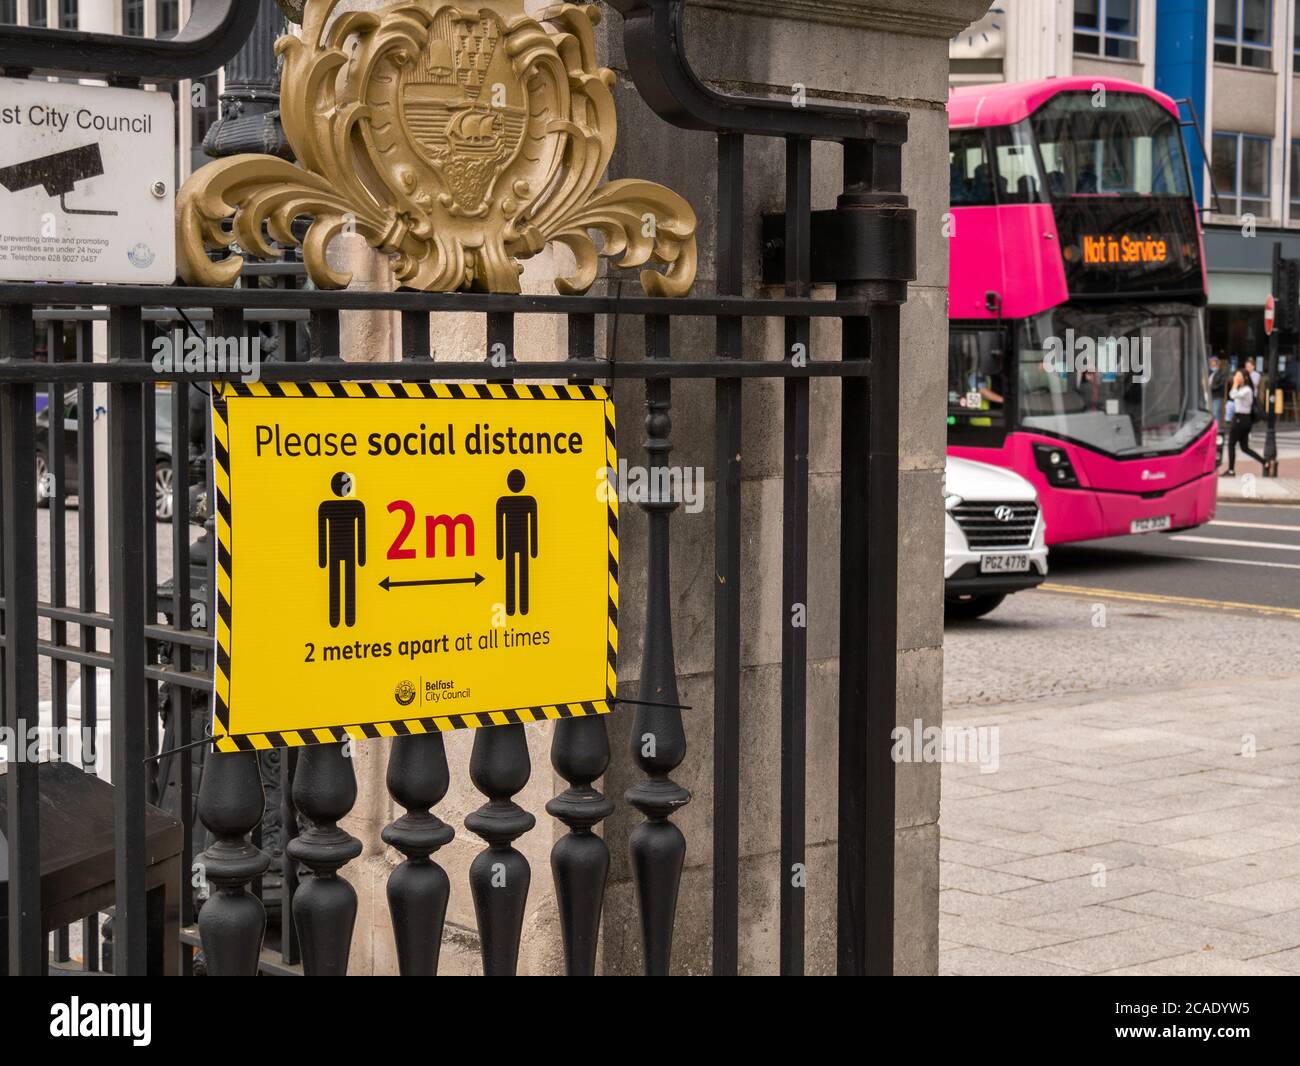 Belfast, Northern Ireland, UK, 6 August 2020: Signs reminding people to Maintain Social Distancing. Sign at the entrance to City Hall instructing people to stay two metres apart at all times. Stock Photo